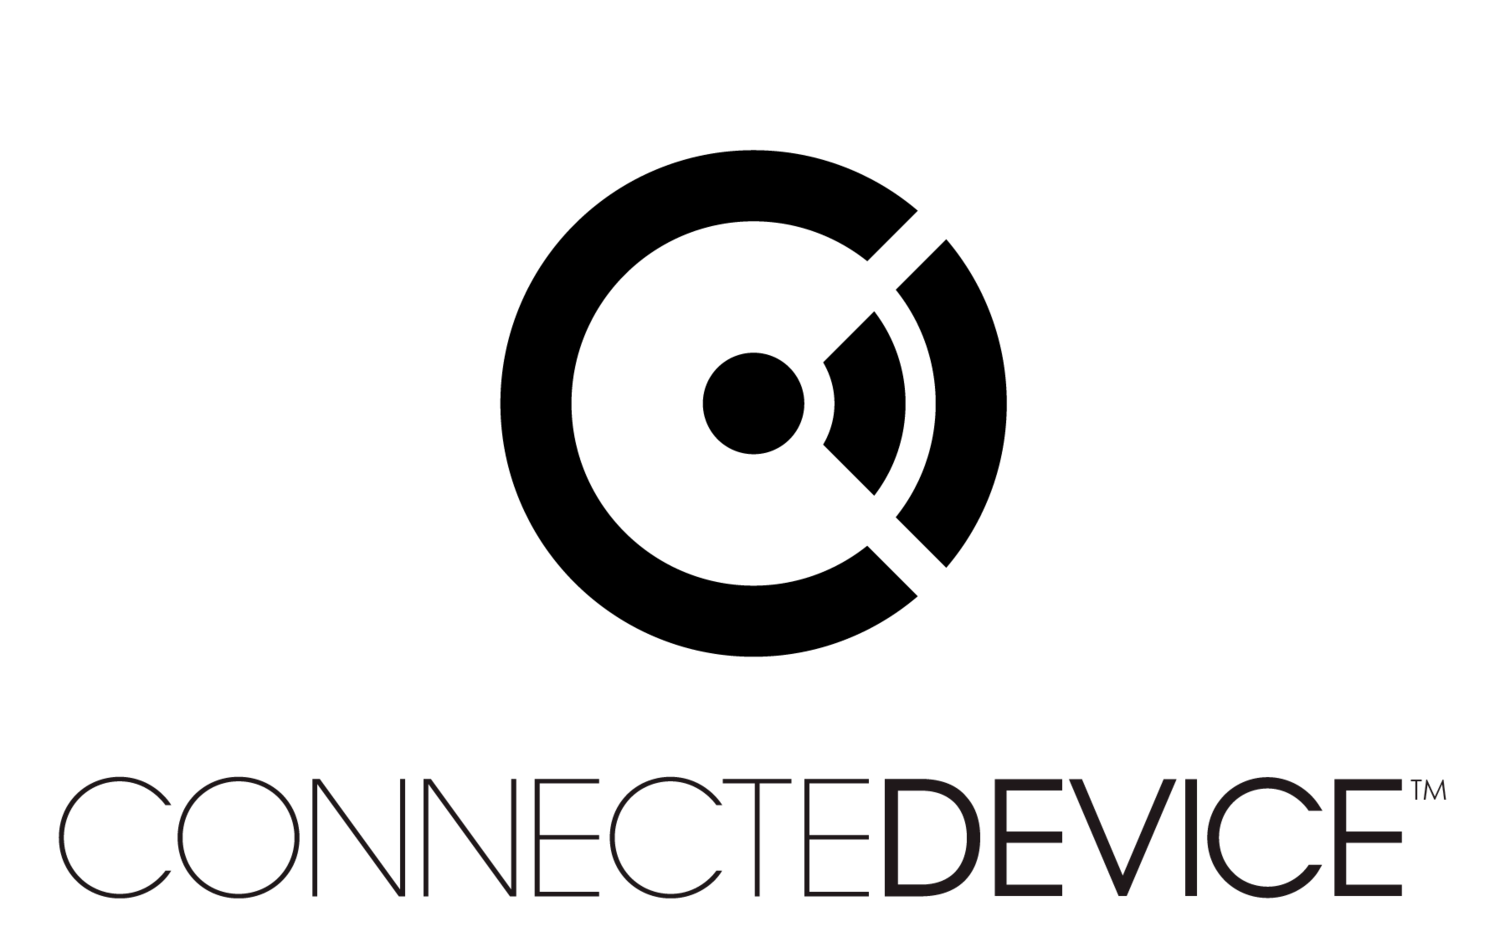 ConnecteDevice